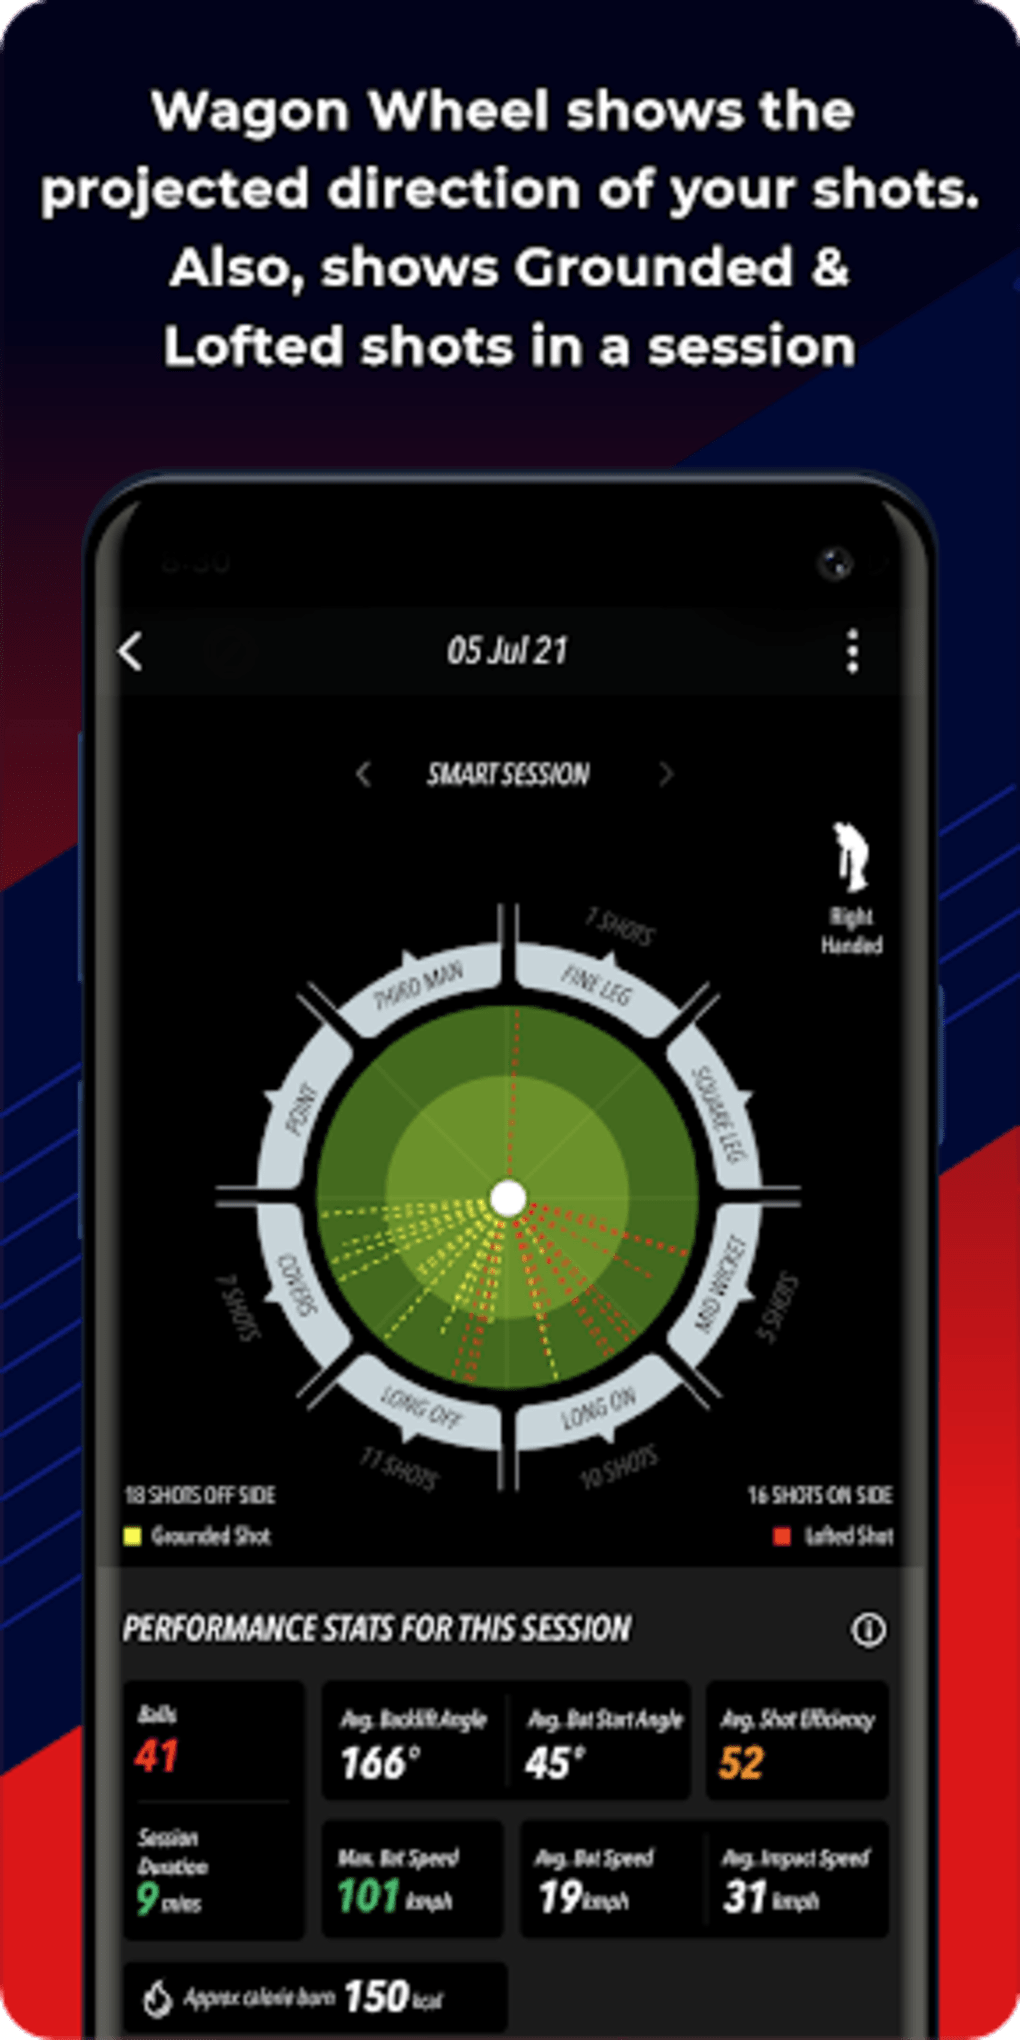 SmartCricket APK for Android